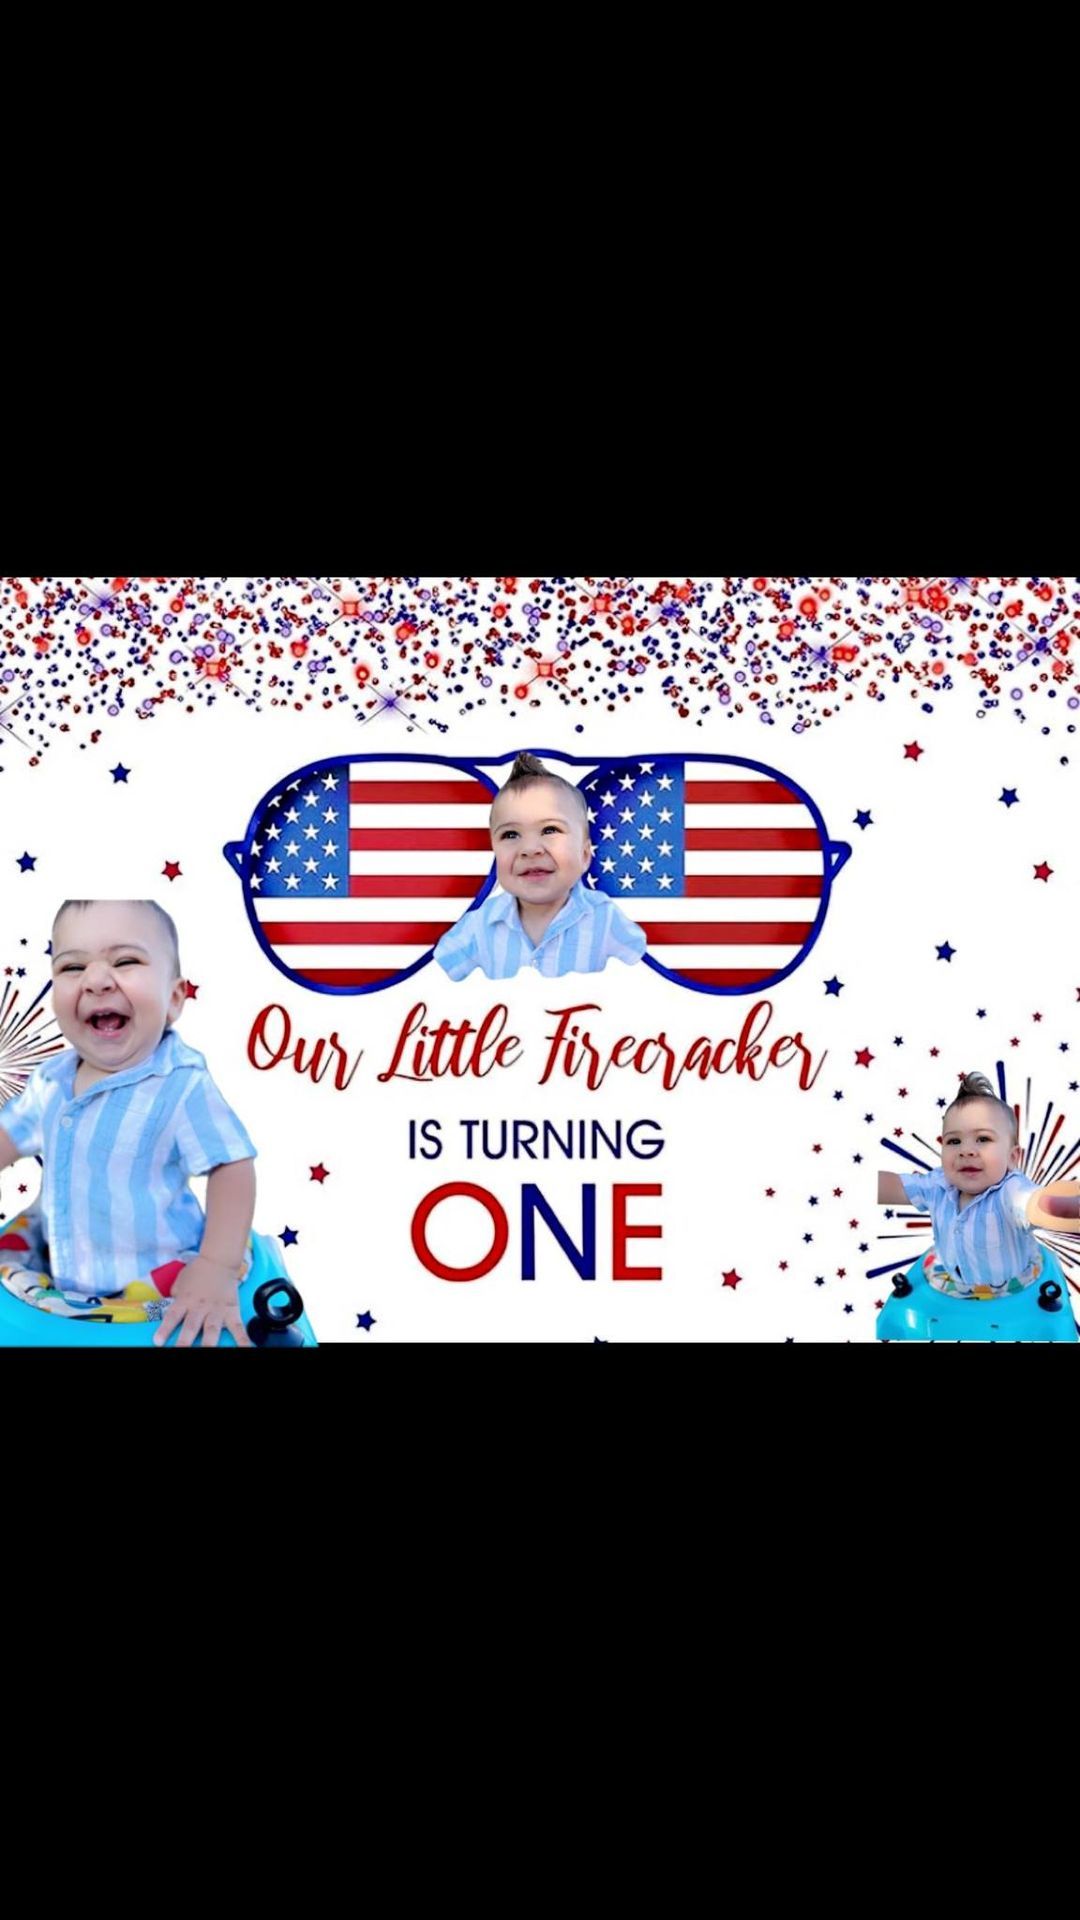 Stars, Stripes & lots of Fun! Our little Firecracker is turning ONE! 